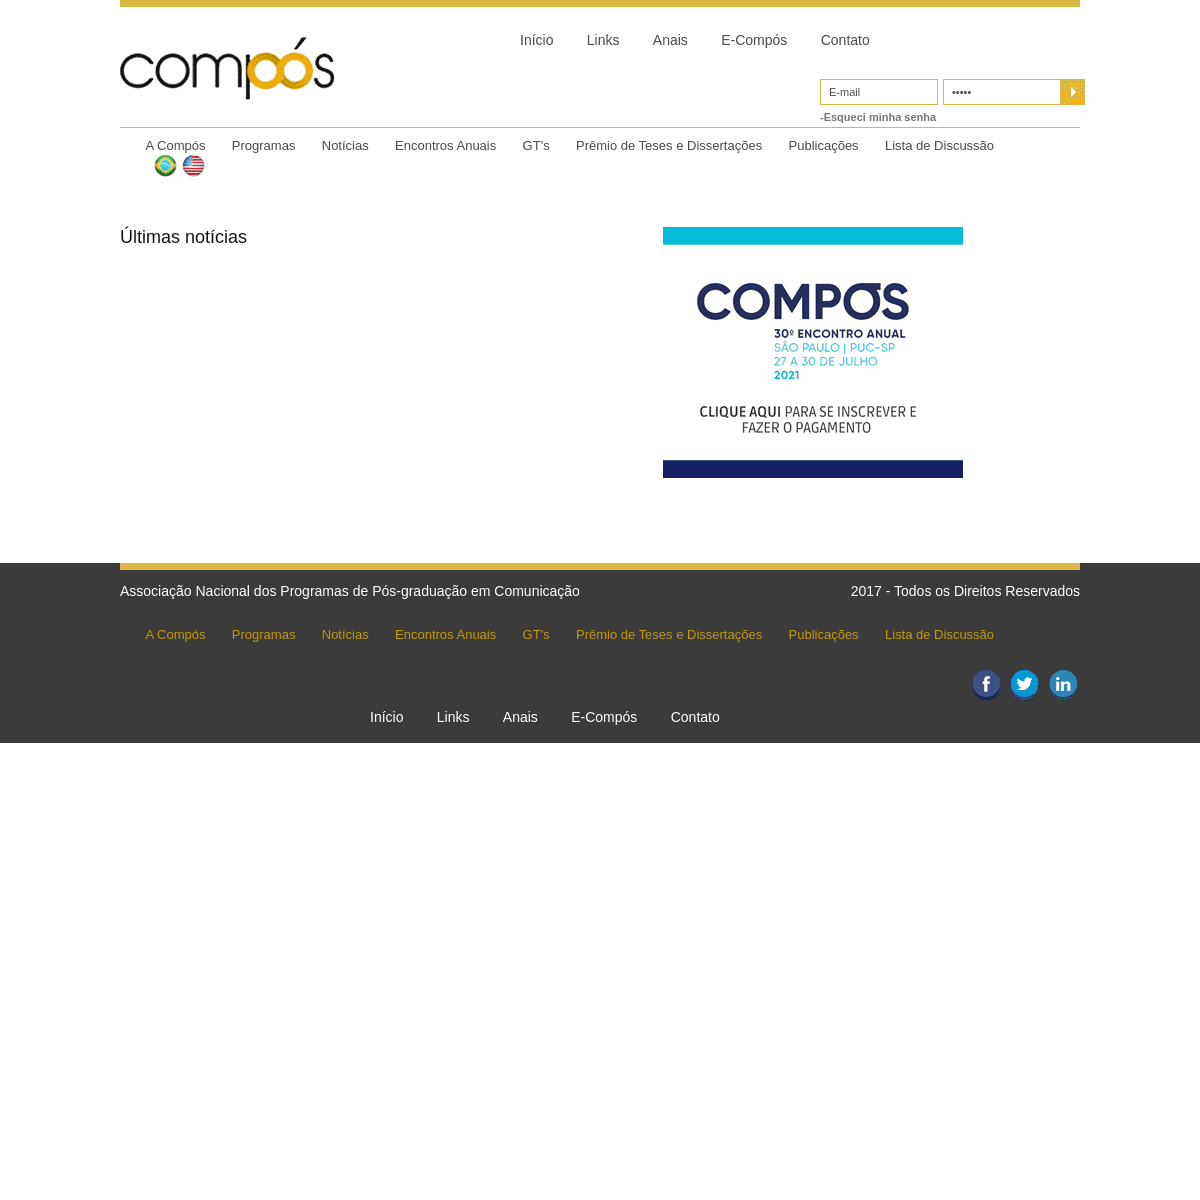 A complete backup of https://compos.org.br